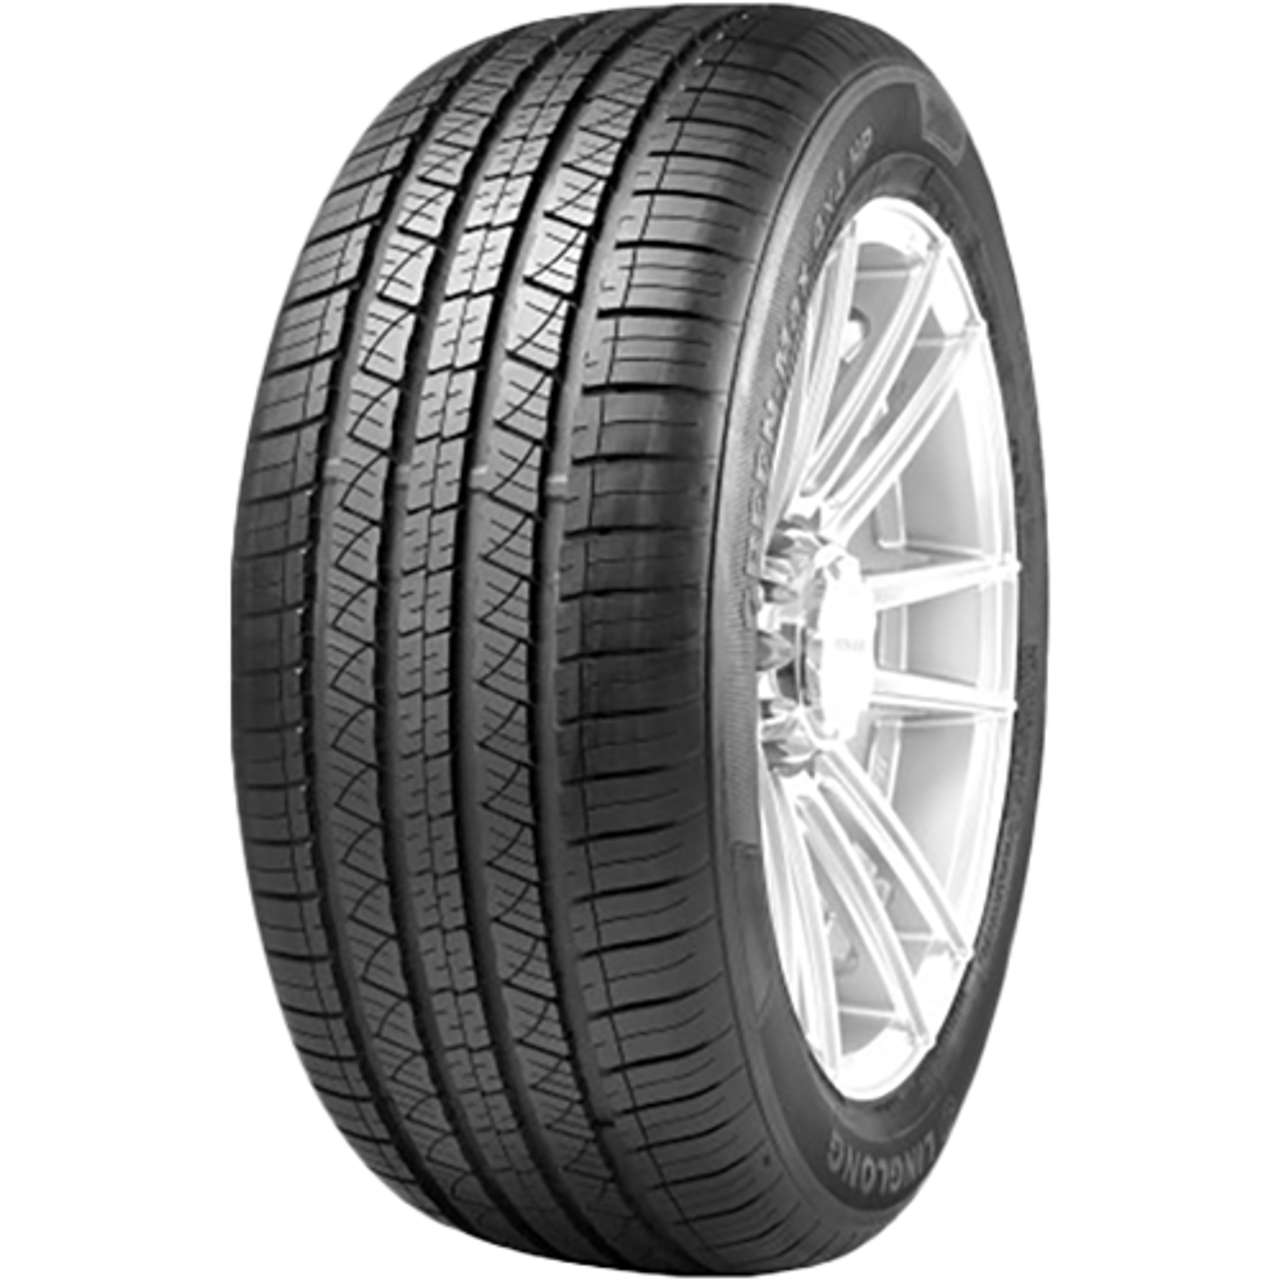 LINGLONG GREEN-MAX 4X4 HP 215/65R16 102H BSW